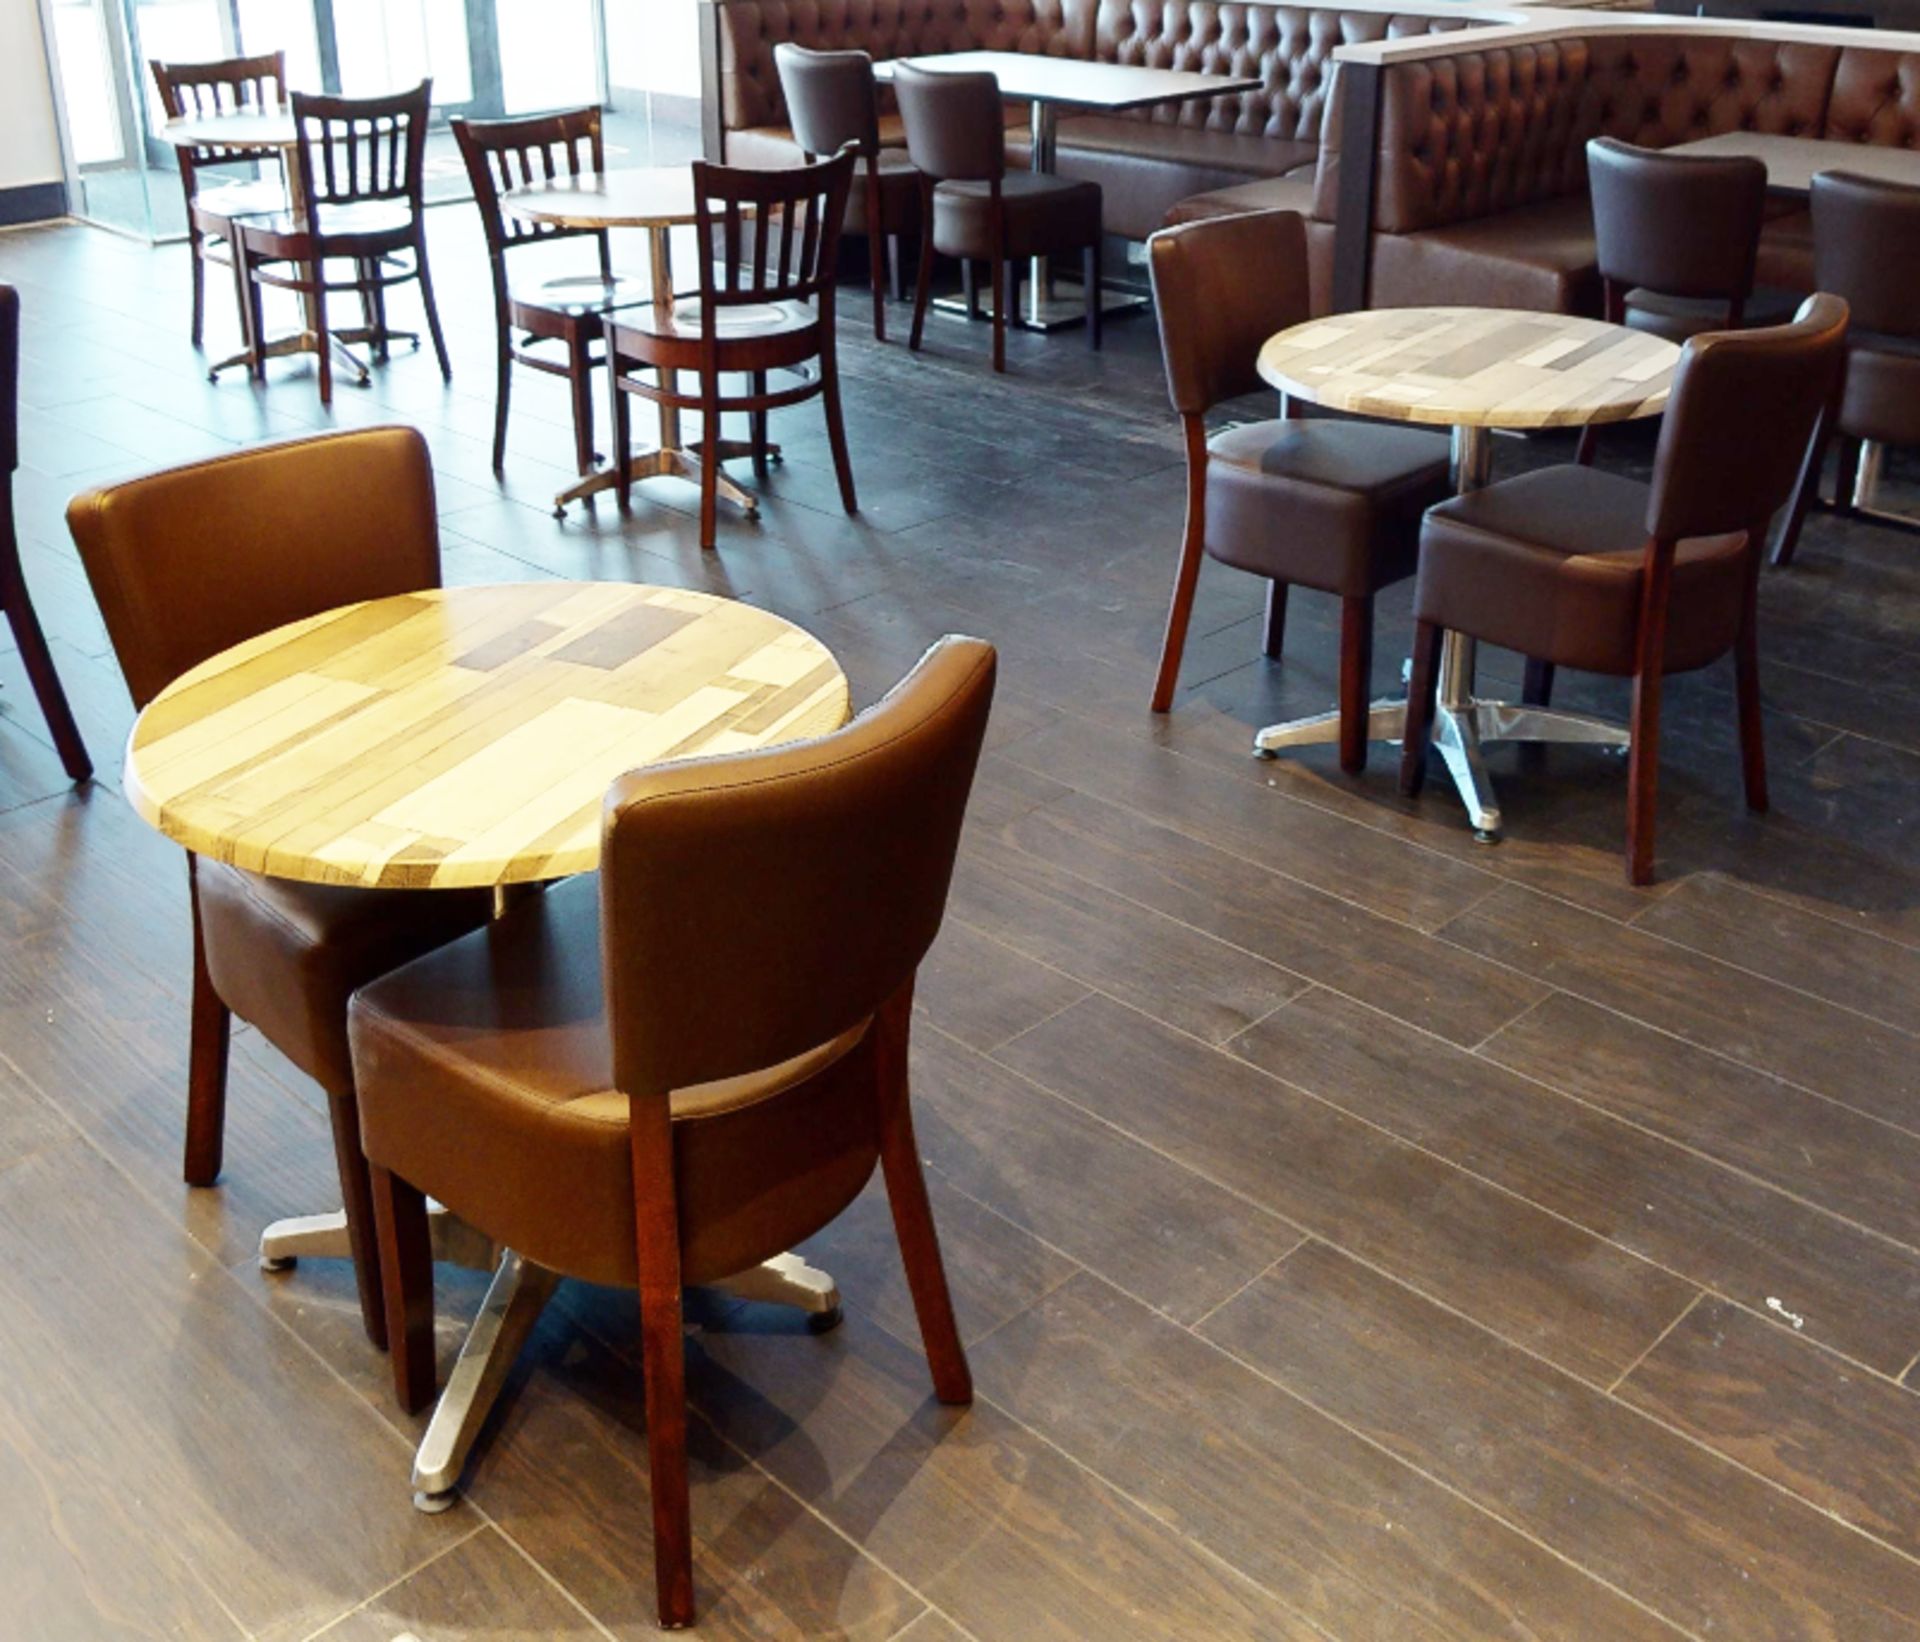 4 x Restaurant Chairs With Brown Leather Seat Pads and Padded Backrests - CL701 - Location: Ashton - Image 6 of 9